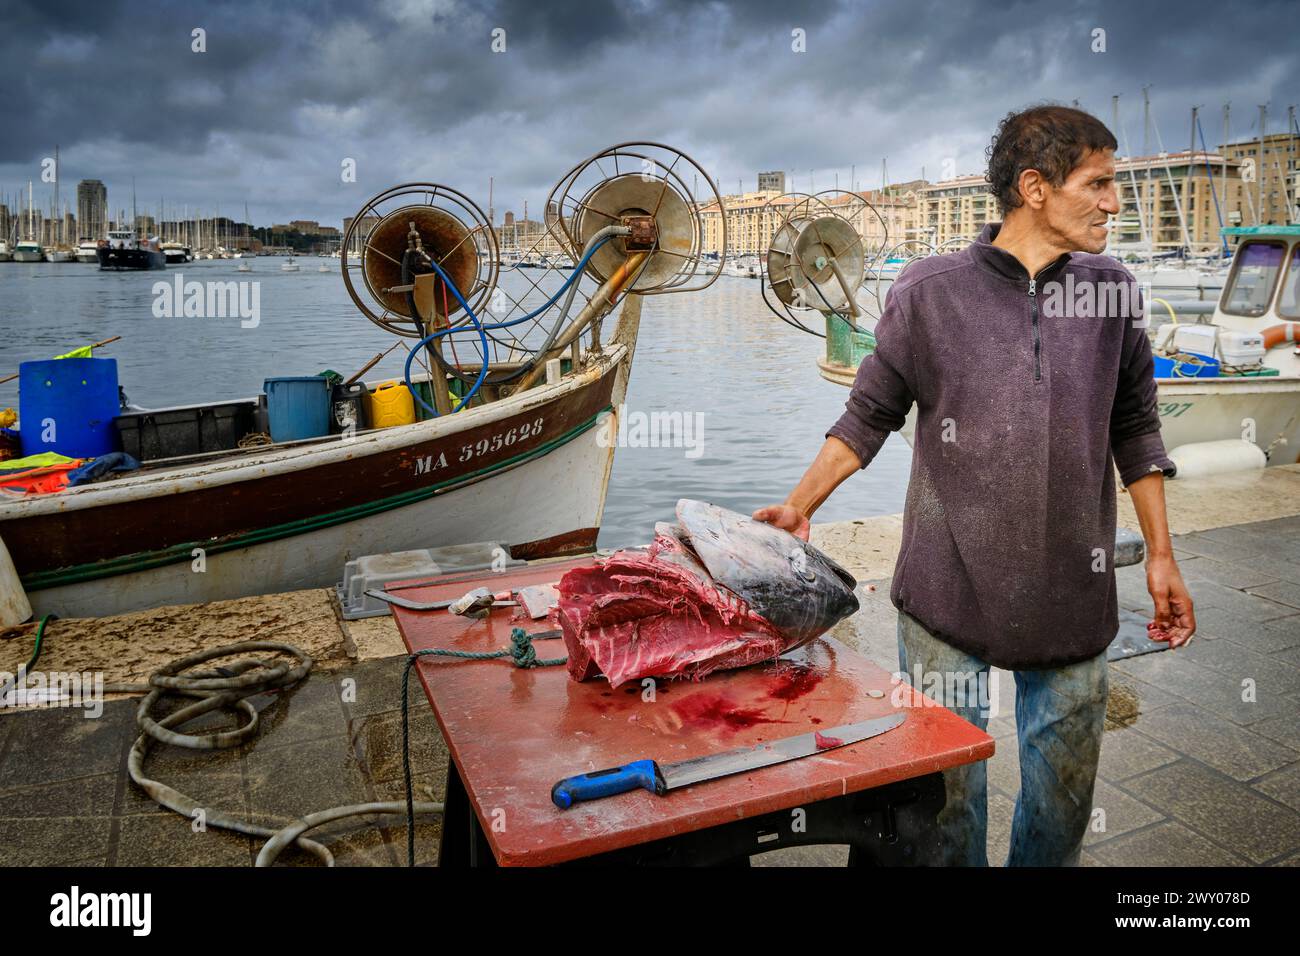 Fish market (Marché aux Poissons) at the Old Port (Vieux Port) in the city center by the Mediterranean Sea. Marseille, France Stock Photo